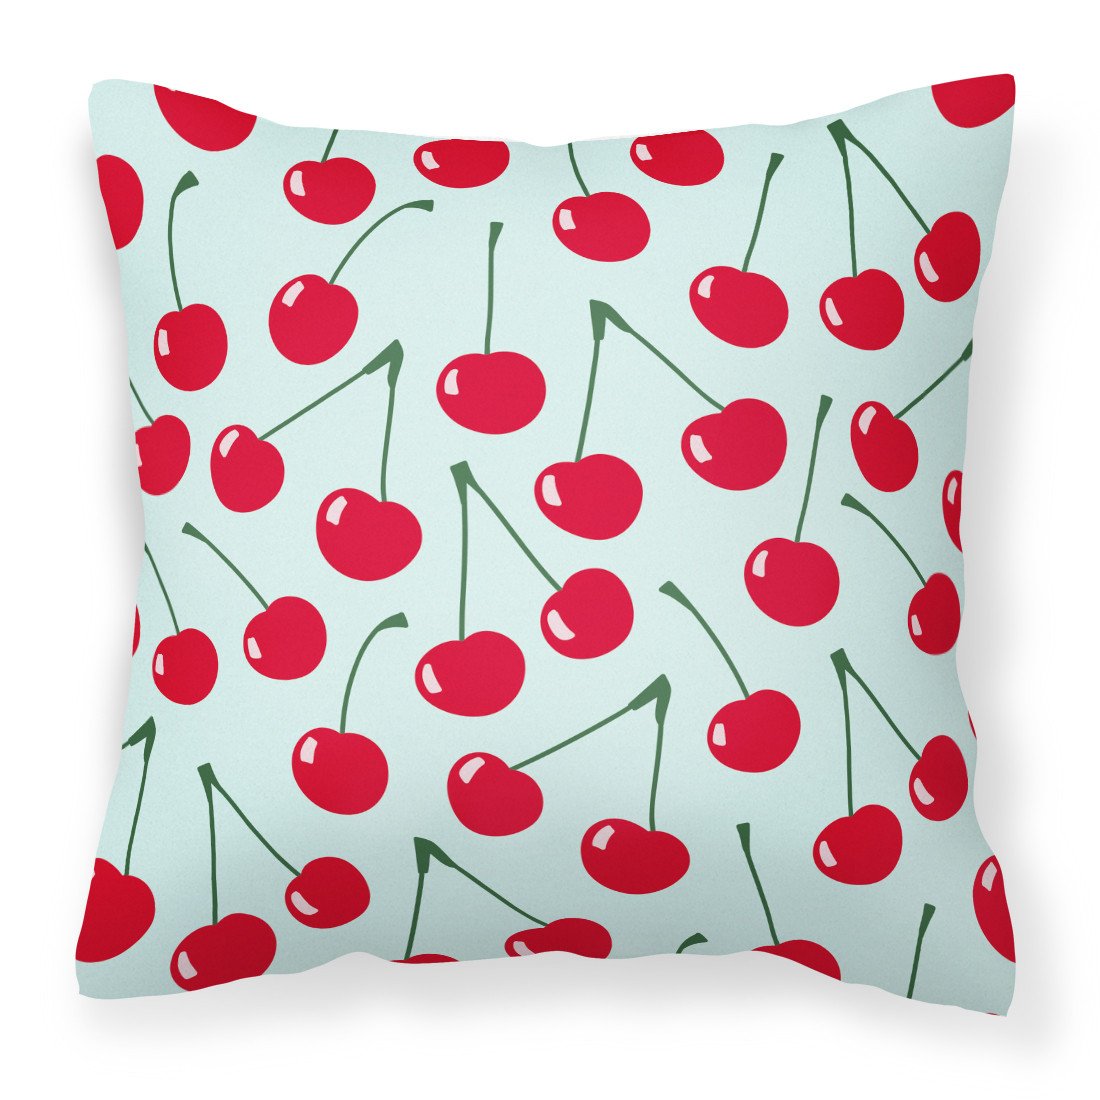 Cherries on Blue Fabric Decorative Pillow BB5148PW1818 by Caroline's Treasures